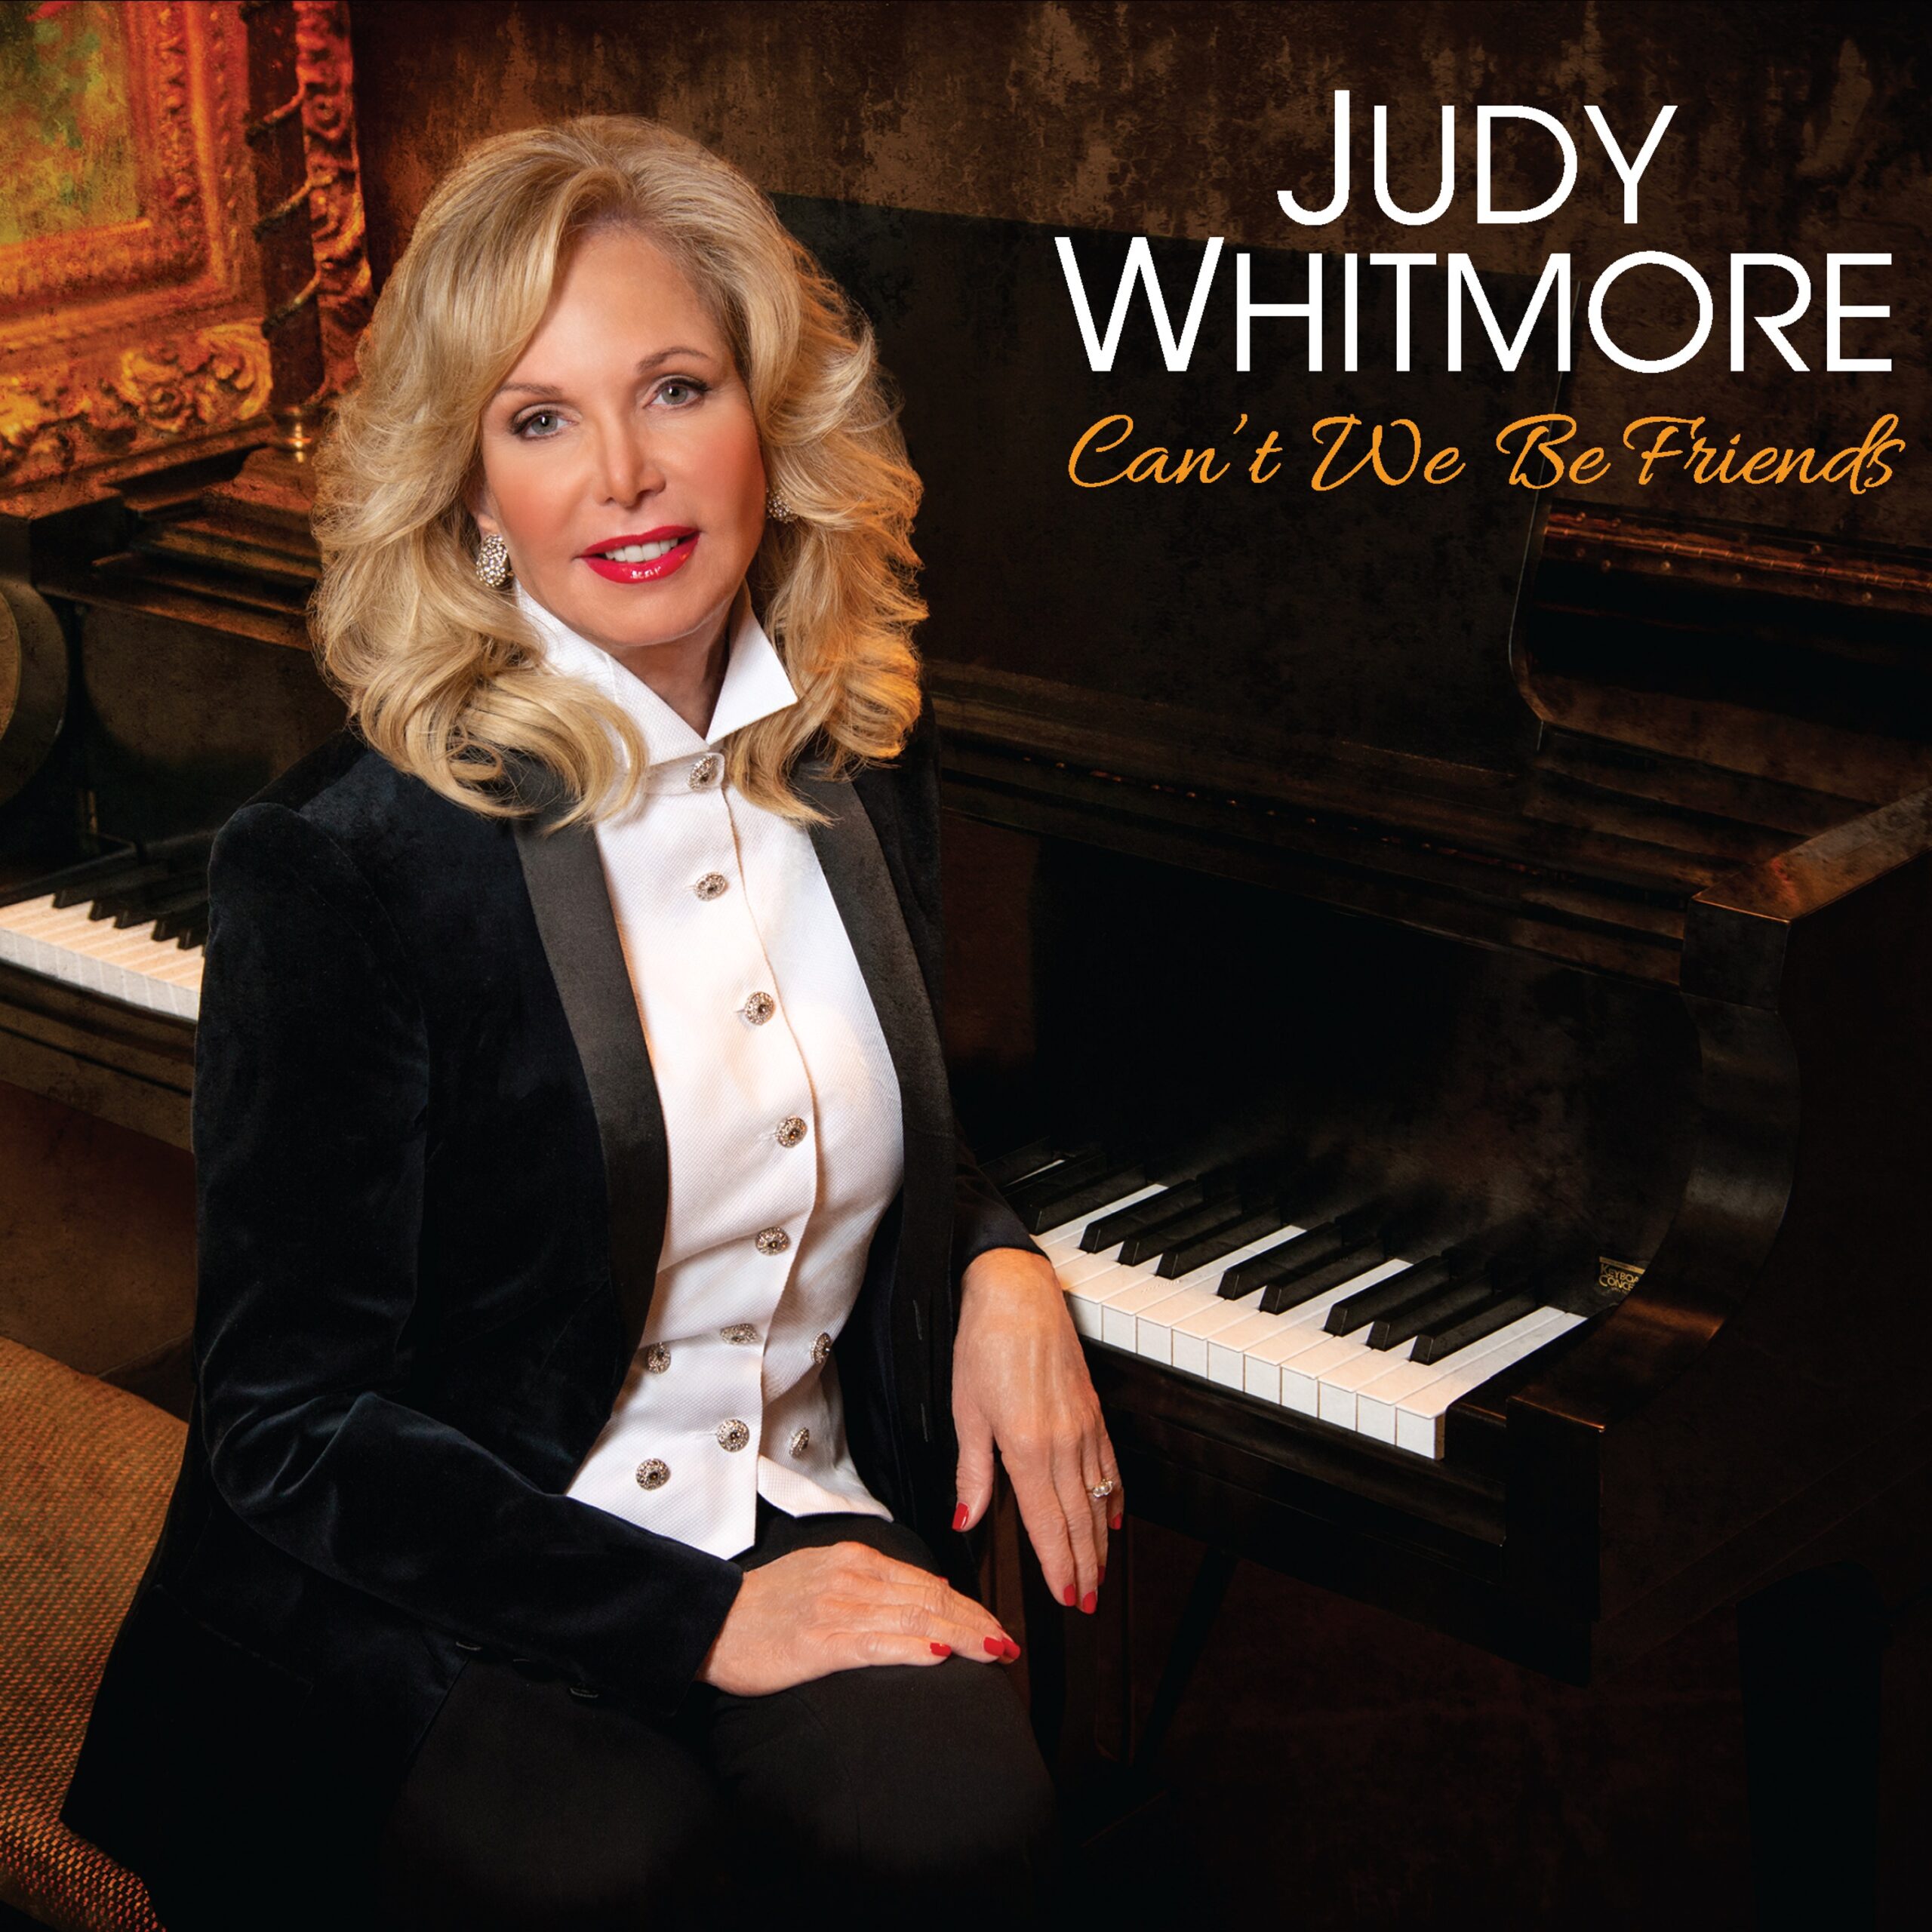 Full Album Credits for Judy Whitmore’s “Can’t We Be Friends”